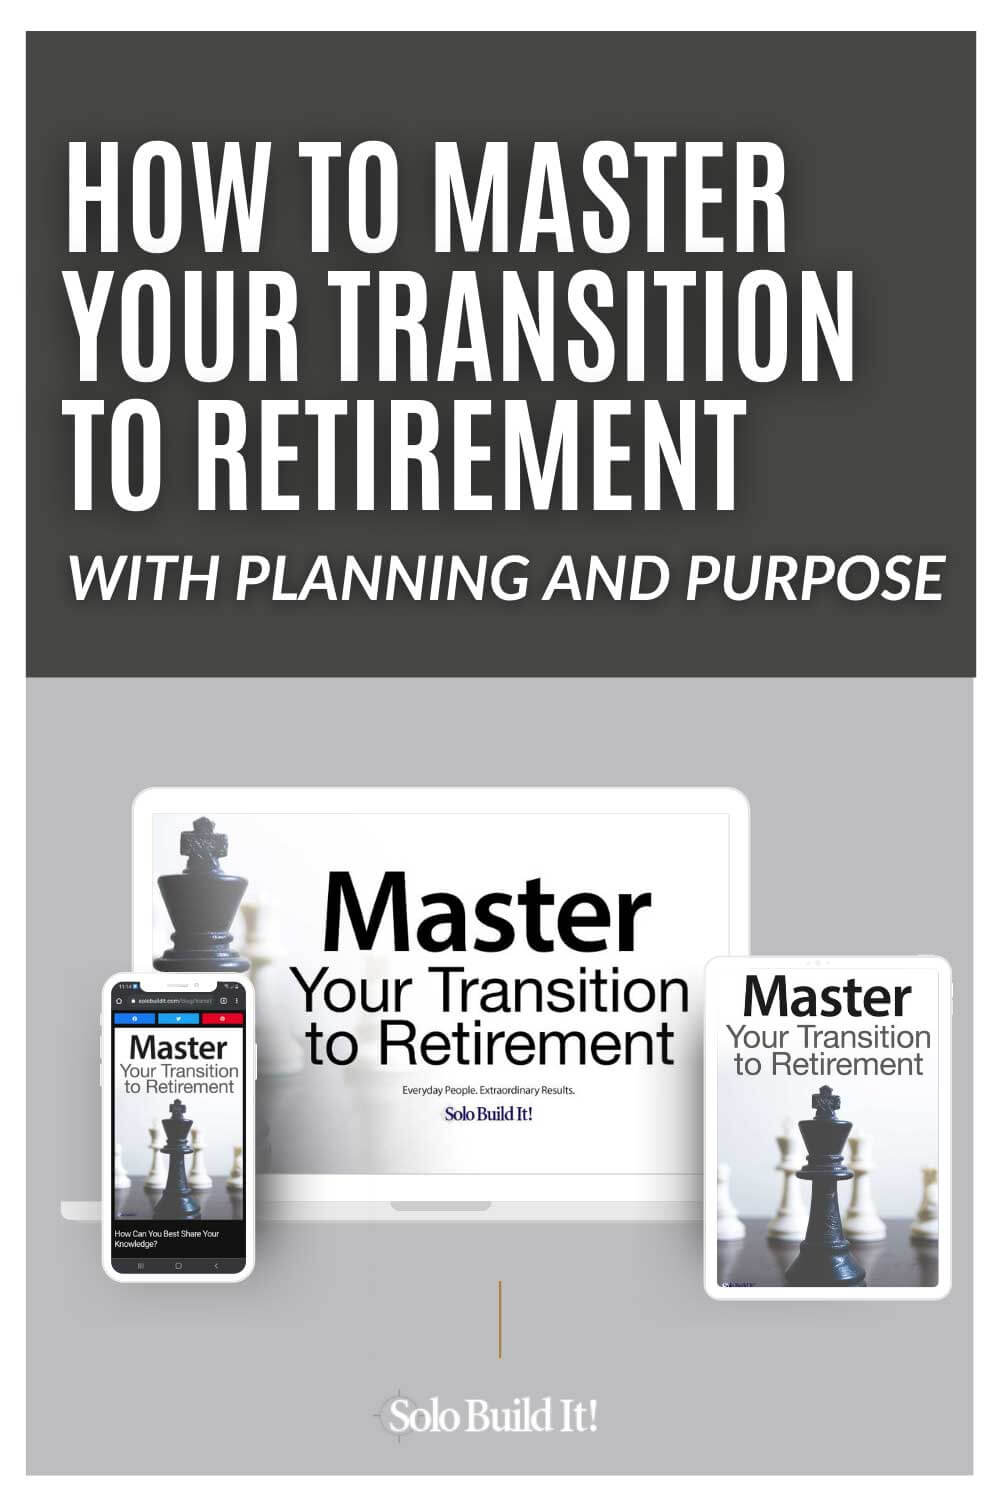 How to Master Your Transition to Retirement